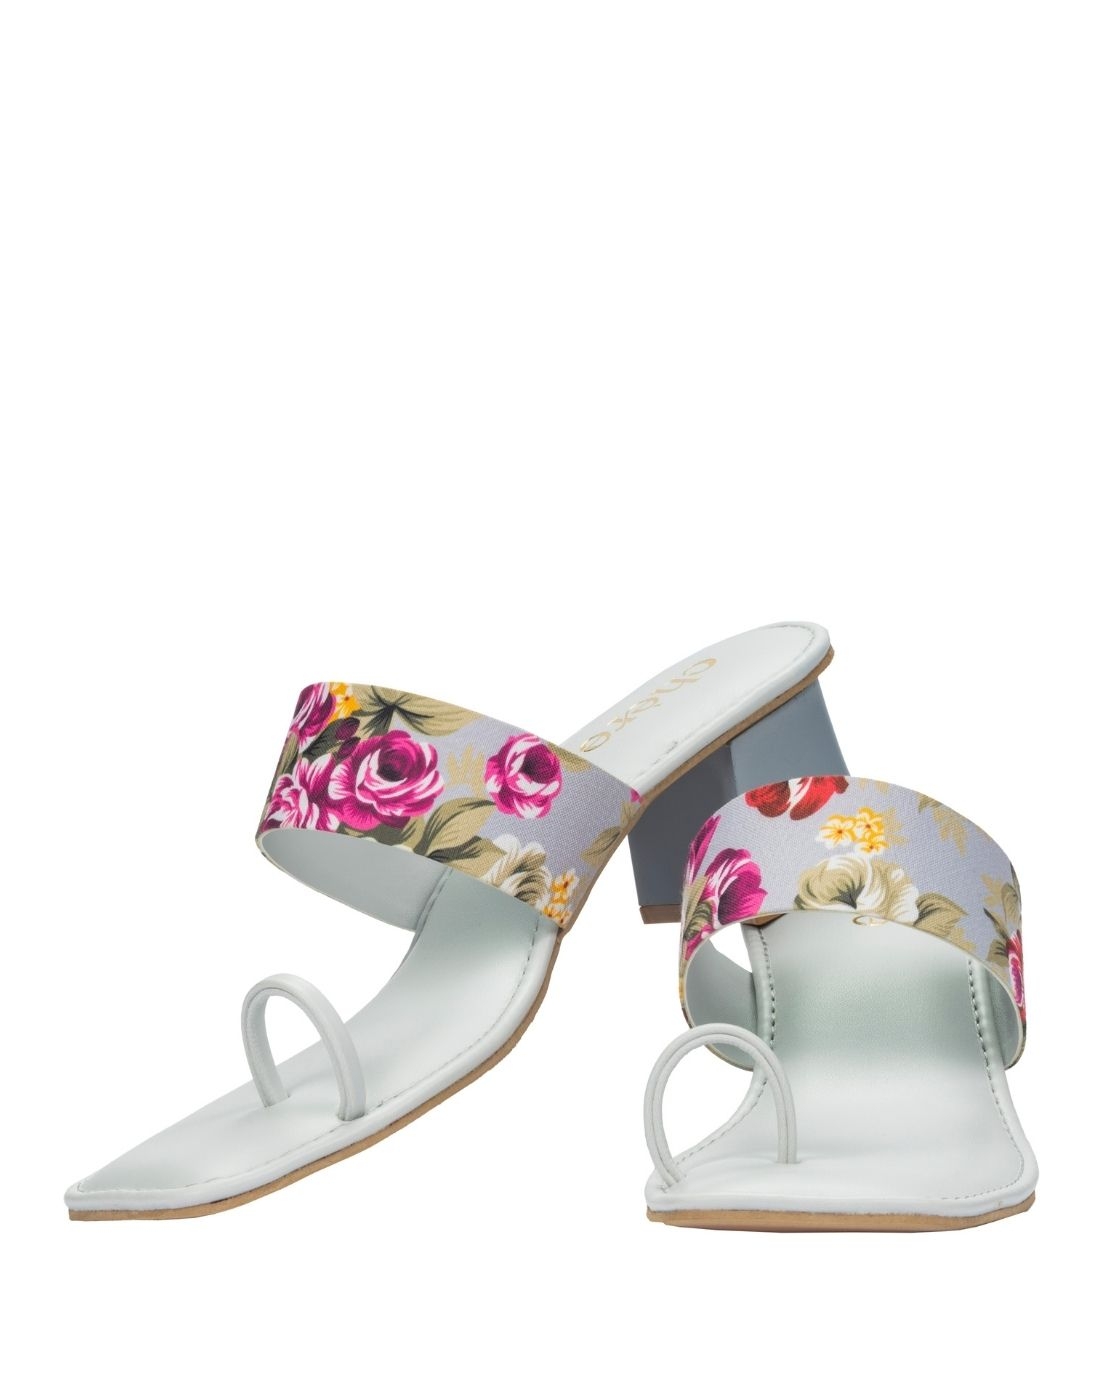 Chere | Designer Heels with floral Motif for womens by CHERE